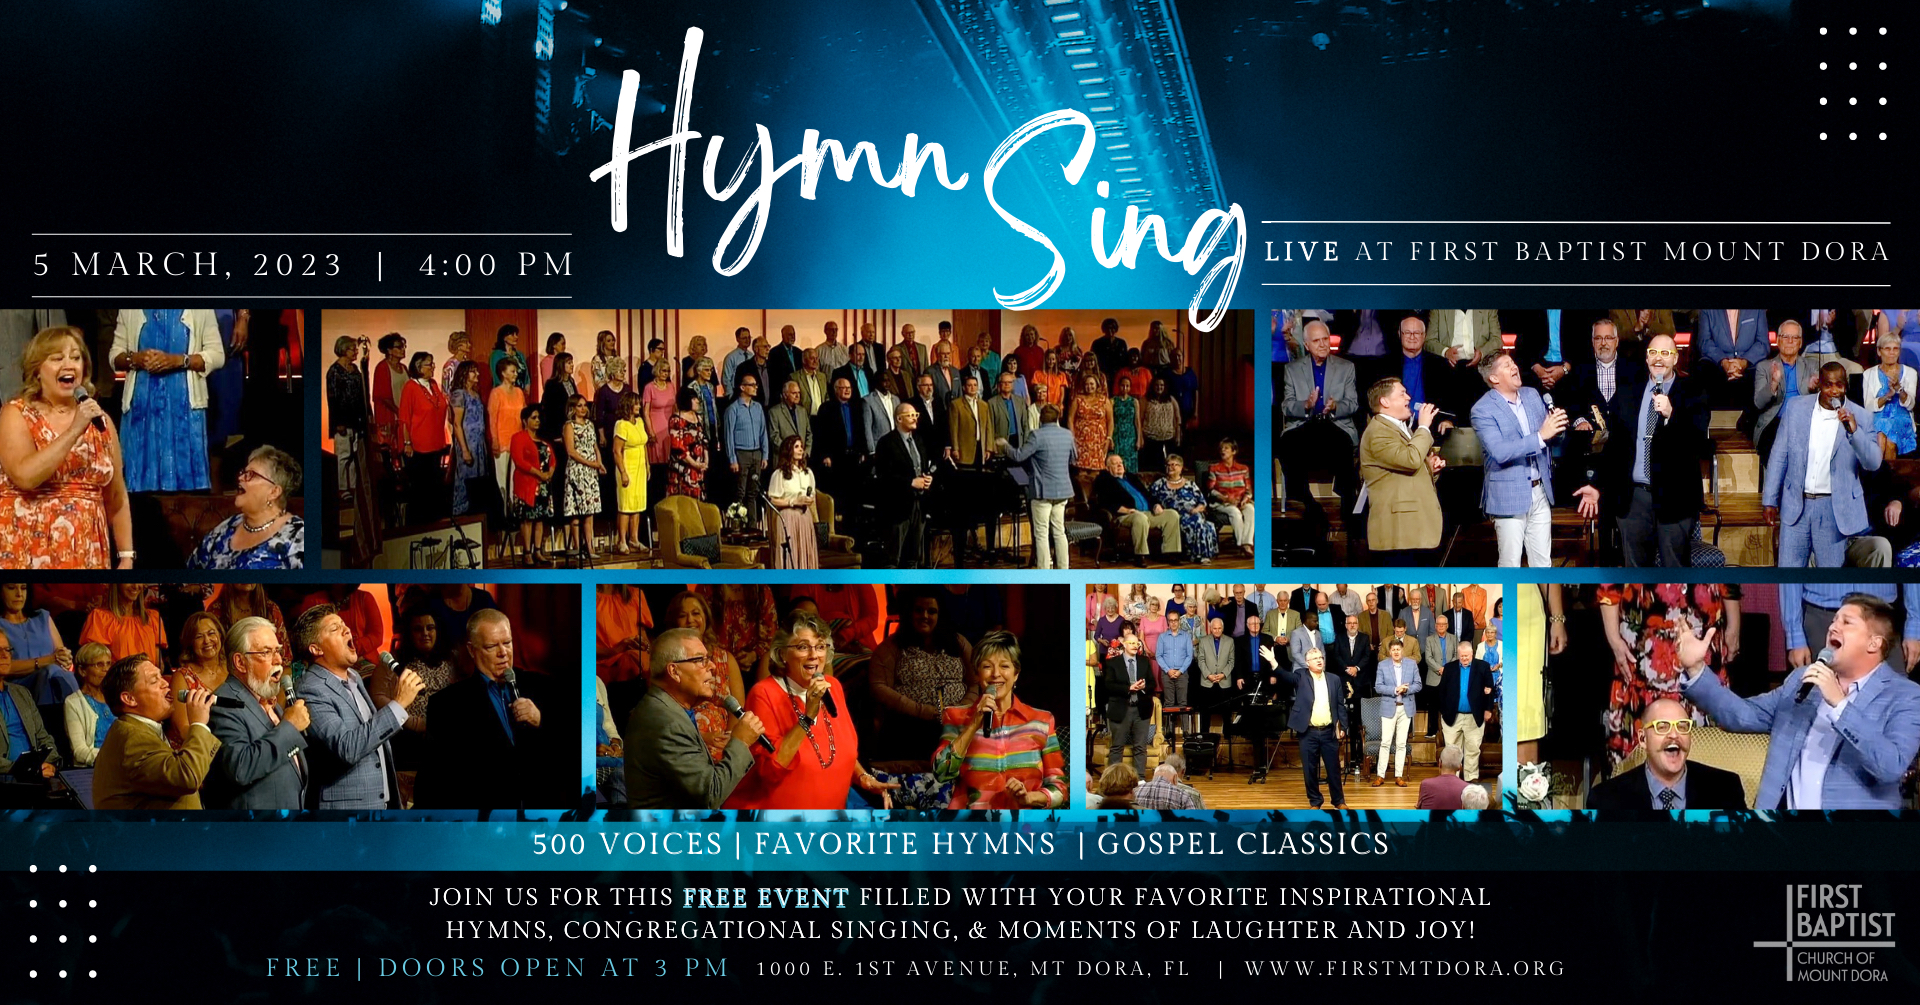 graphic invitation to Hymn Sing, featuring several images of choir performers